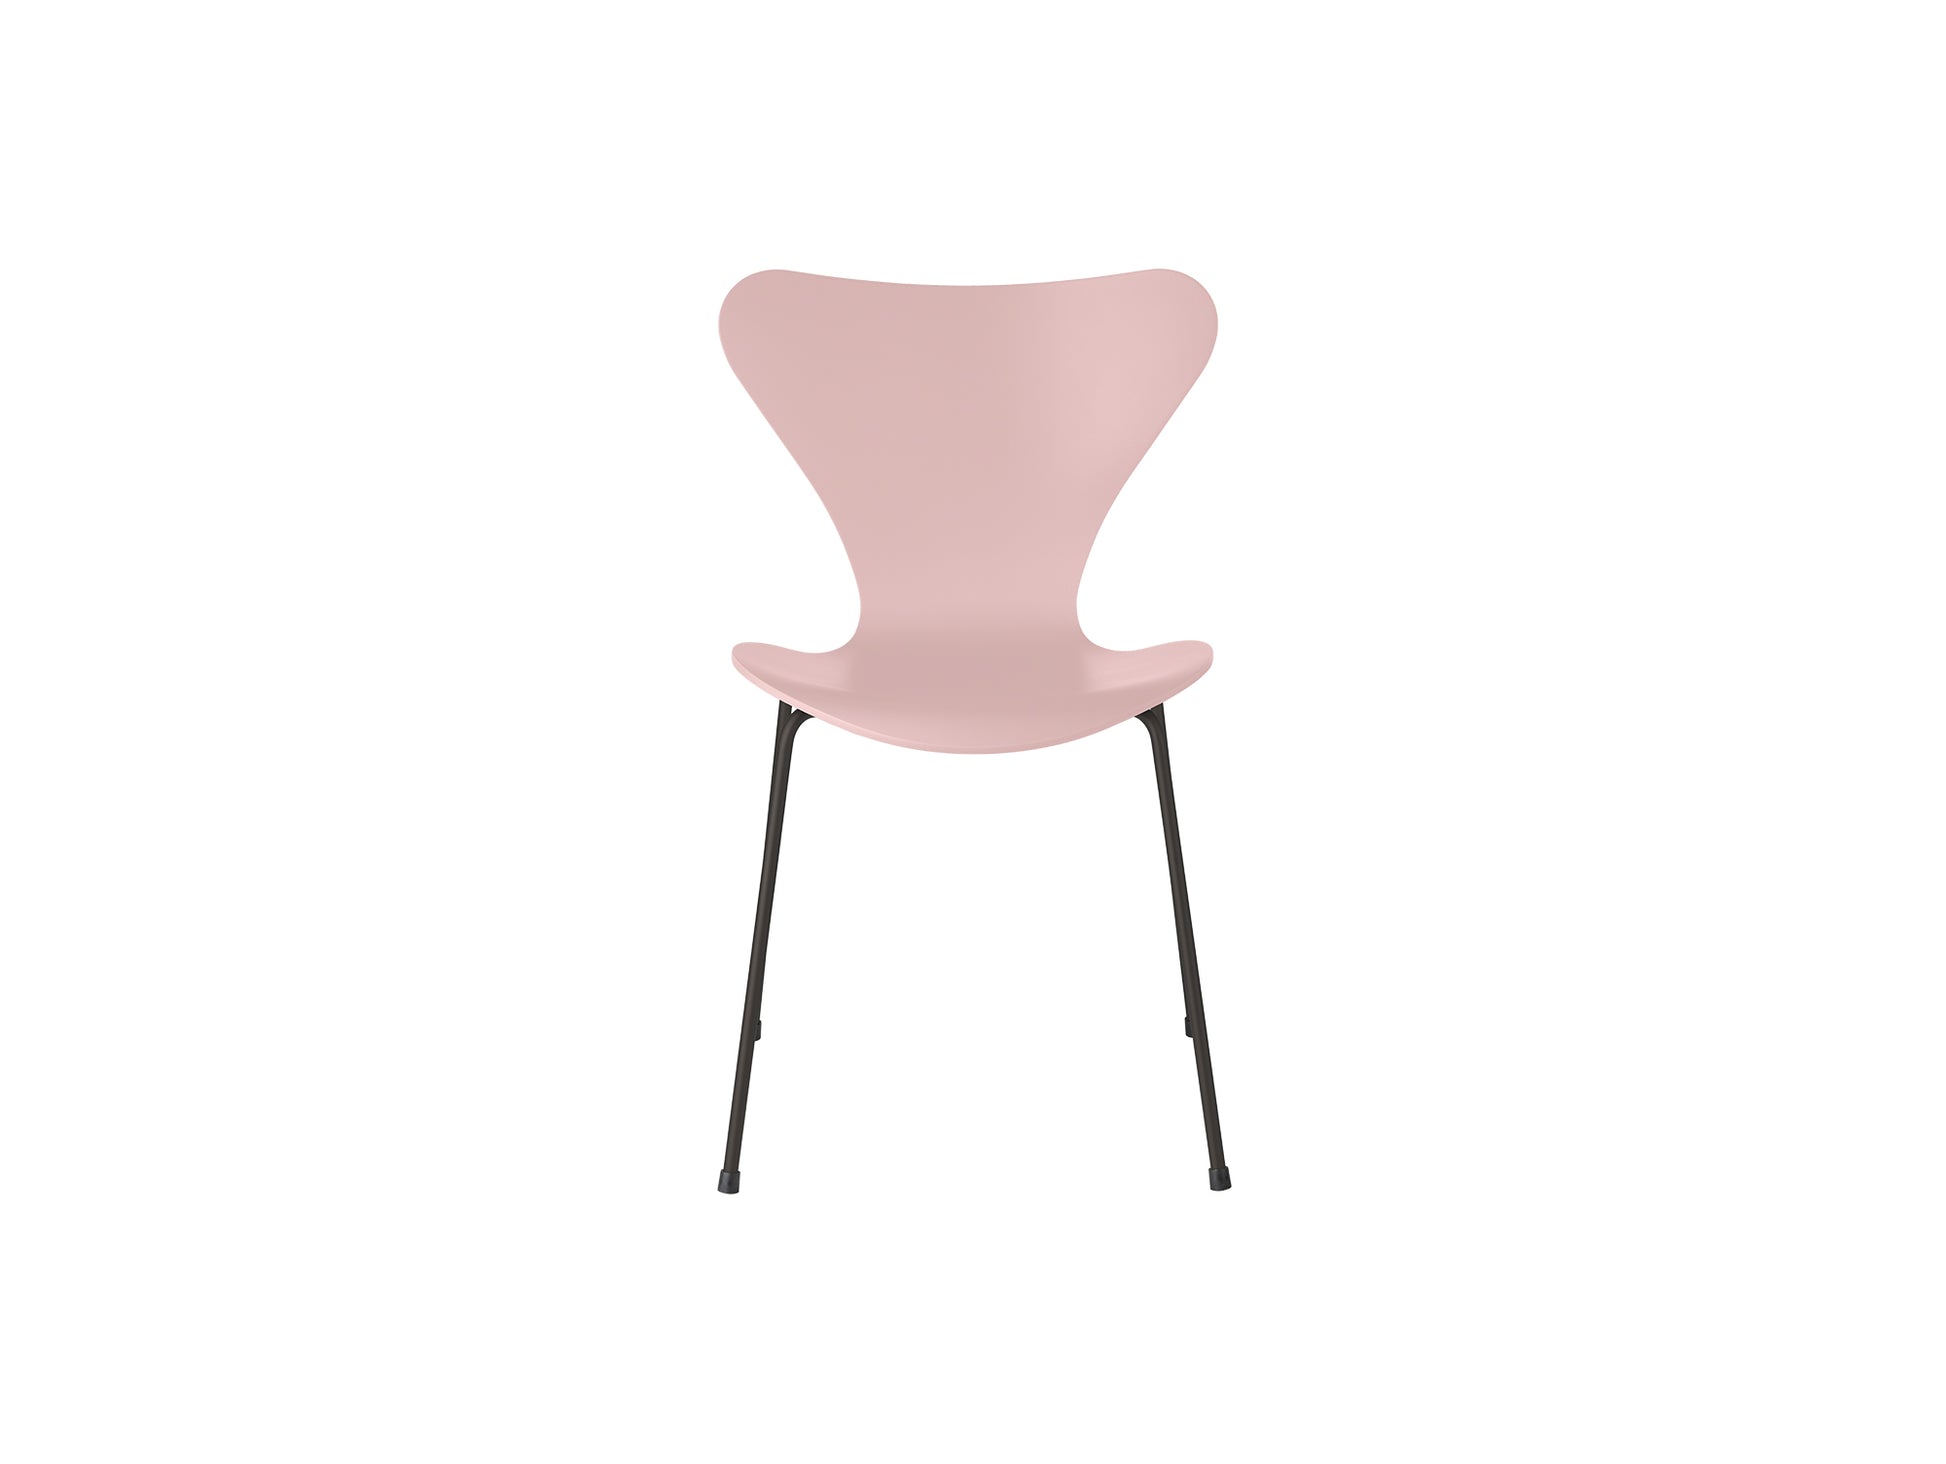 Series 7™ 3107 Dining Chair by Fritz Hansen - Pale Rose Lacquered Veneer Shell / Warm Graphite Steel